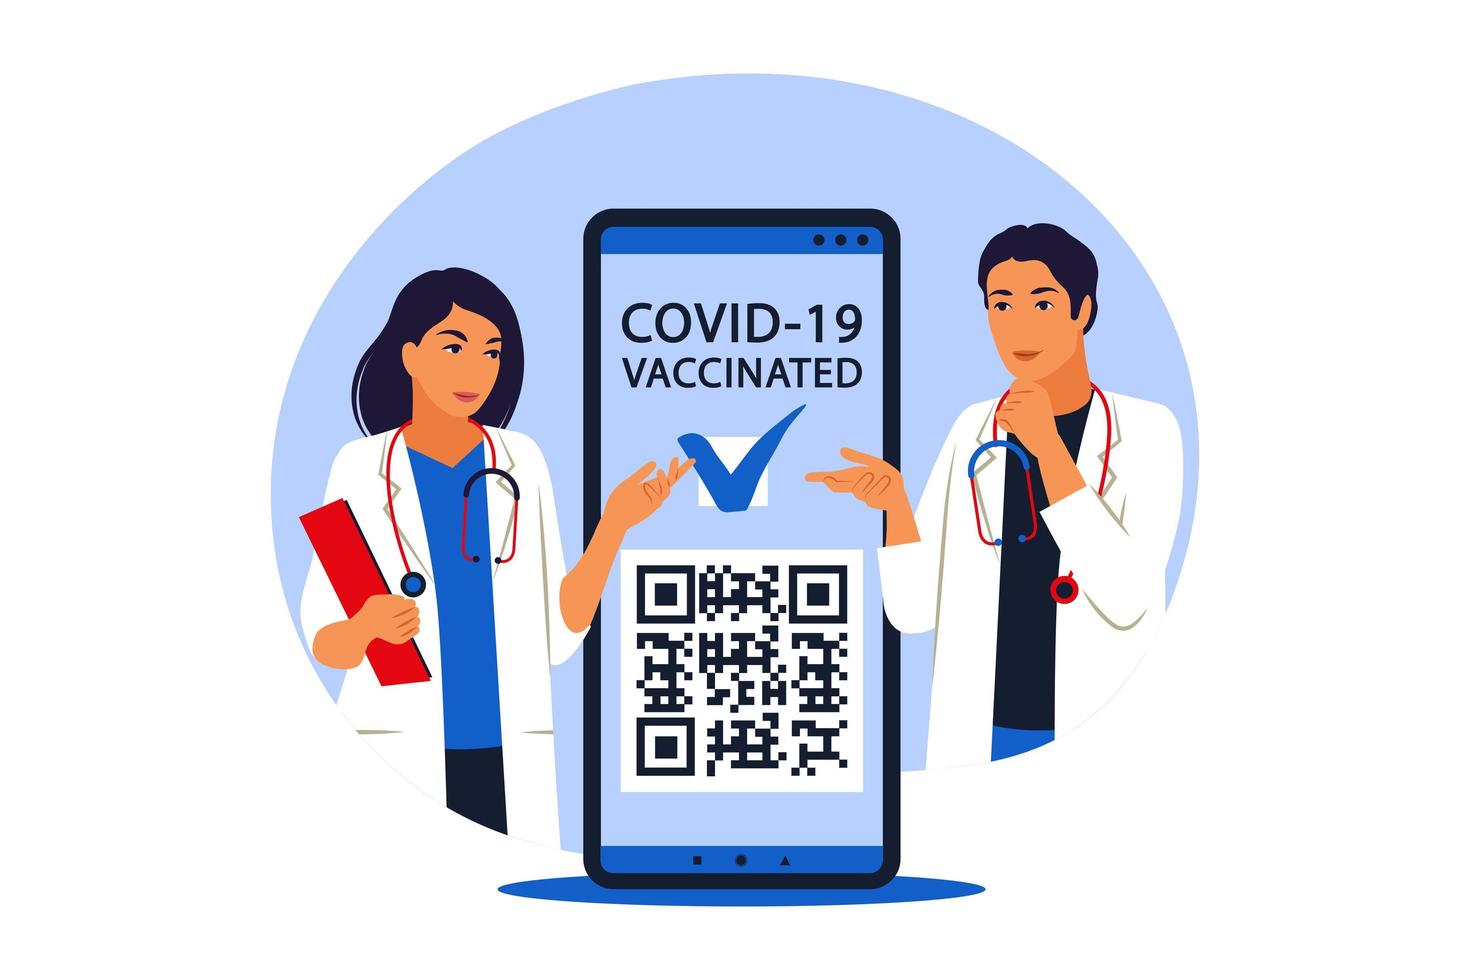 Certificate of vaccination on mobile phone screen with qr-code and pass check mark vaccinated. Mobile application. Vector illustration. Flat.